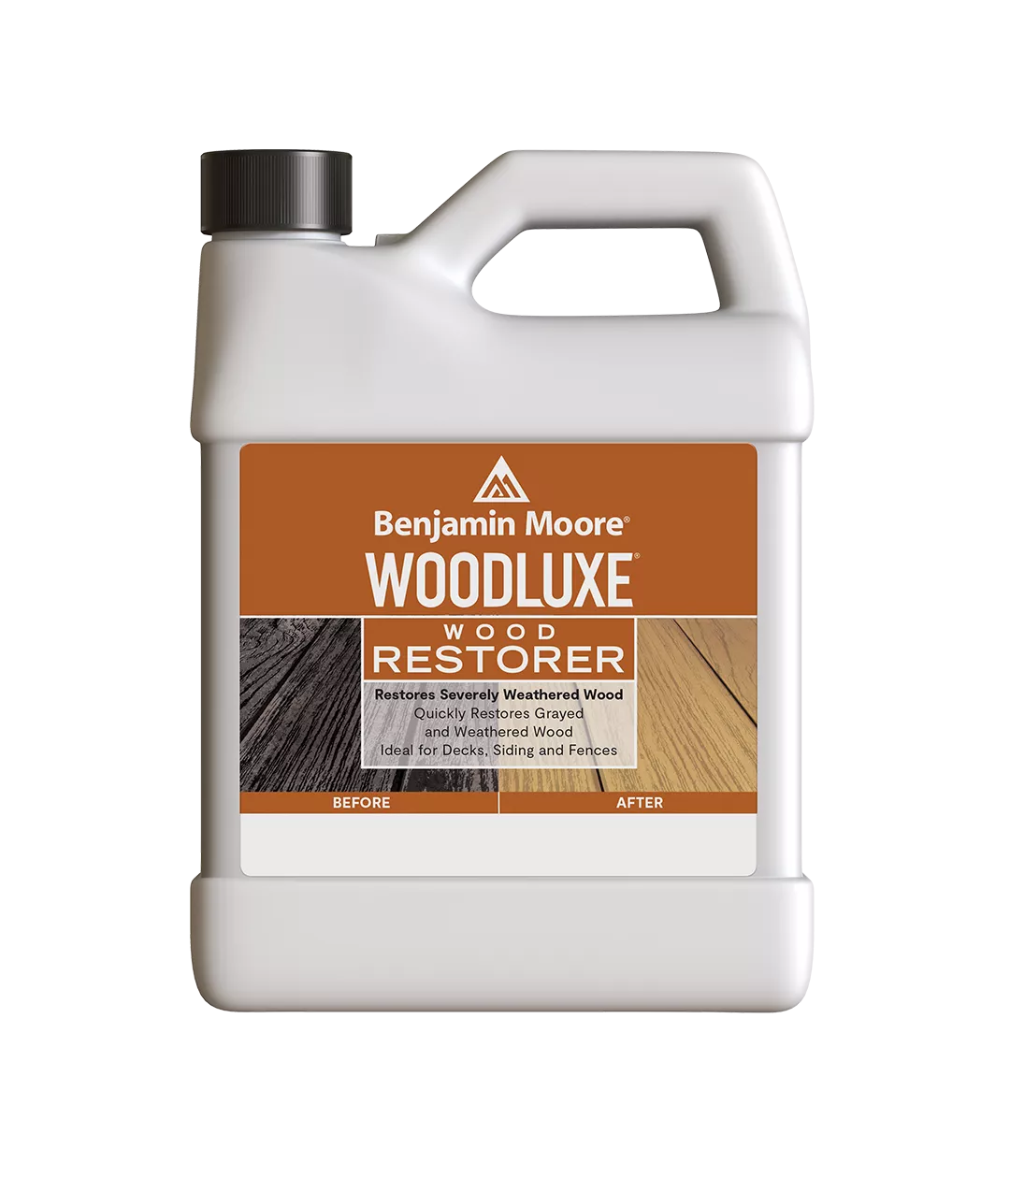 Benjamin Moore Woodluxe Wood Restorer Gallon available at JC Licht.